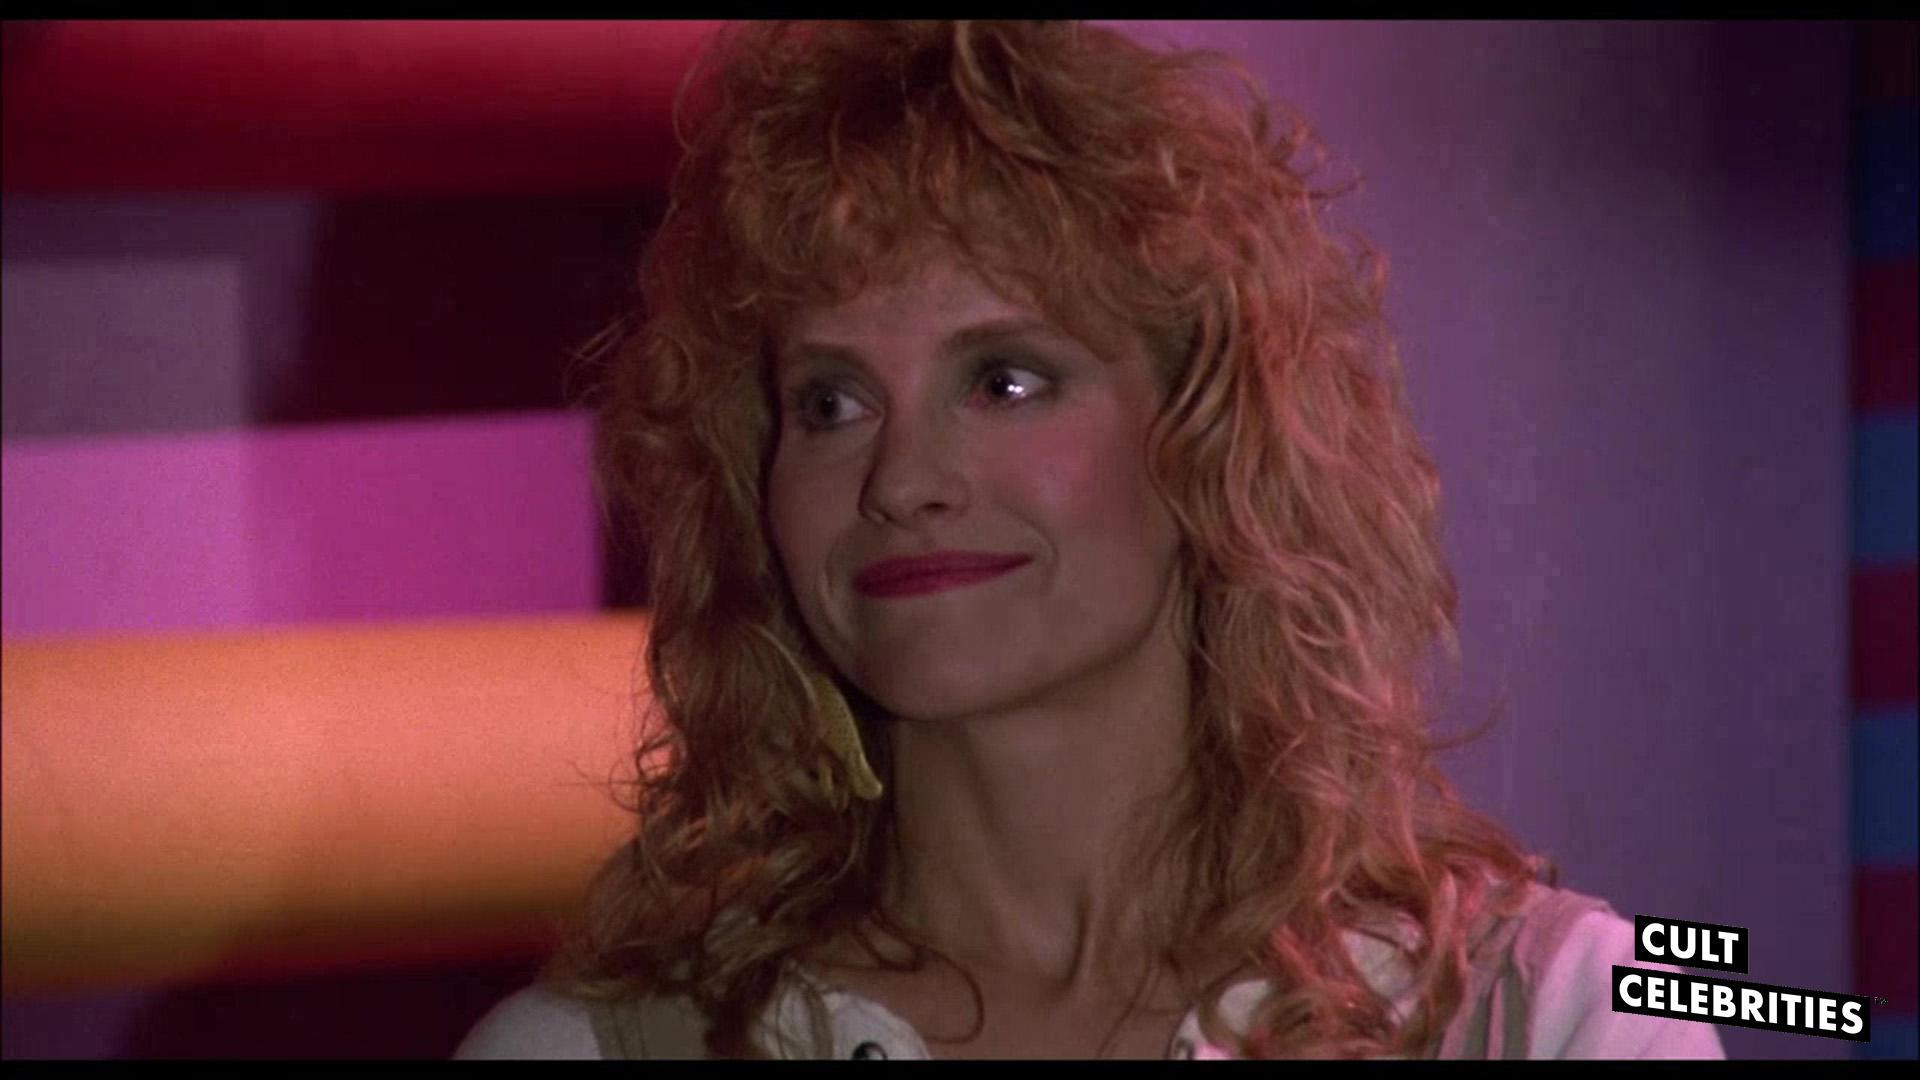 Suzanne Snyder in Killer Klowns from Outer Space (1988)